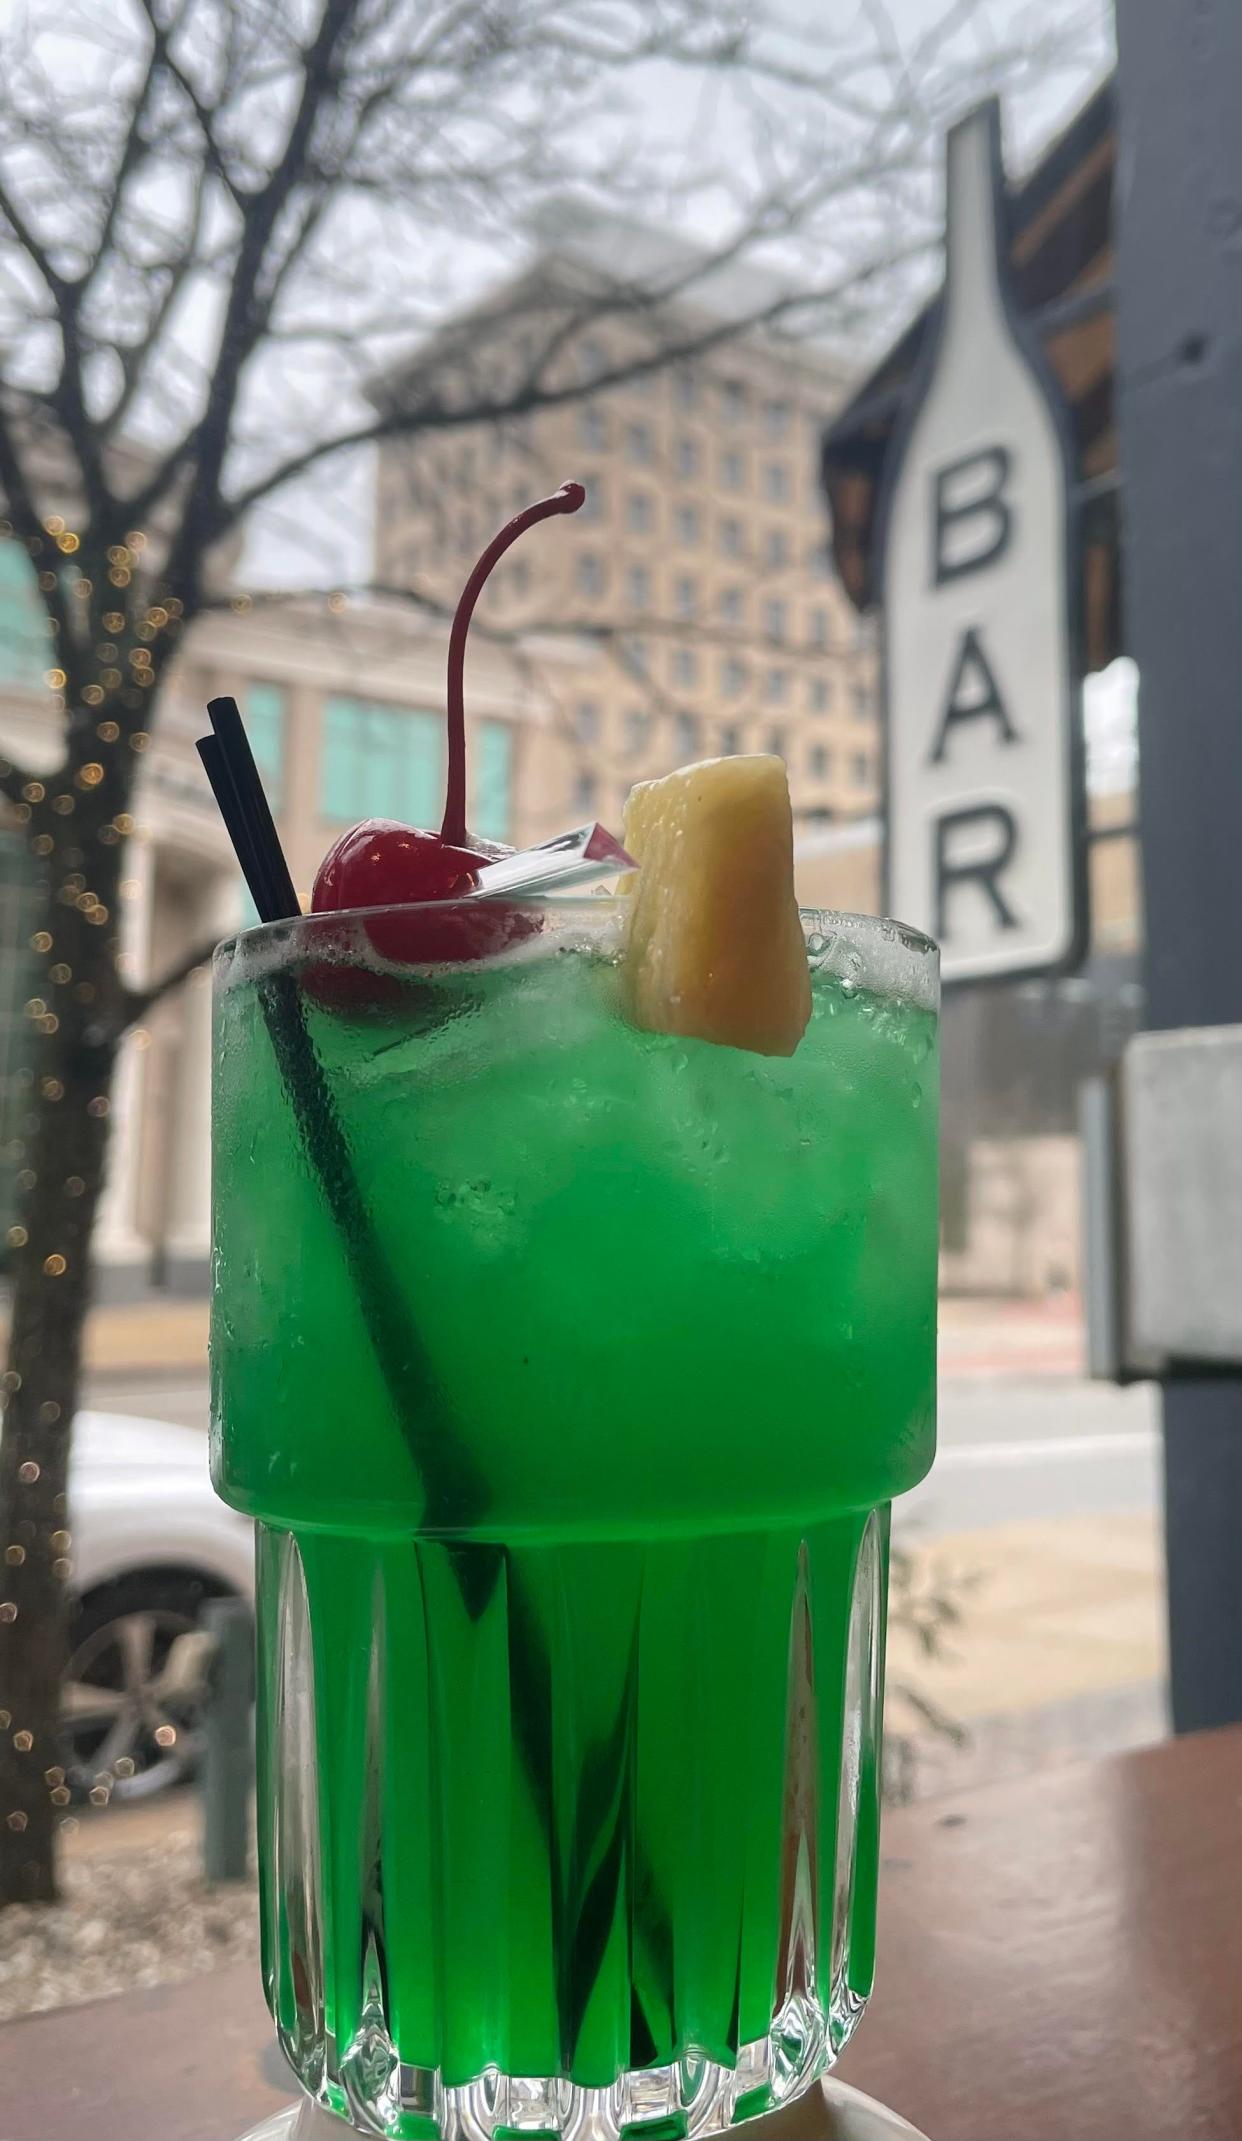 The crazy leprechaun is one of several alcoholic St. Patrick's Day weekend specials at Samantha's Downtown and Rae's on Court in Canton.